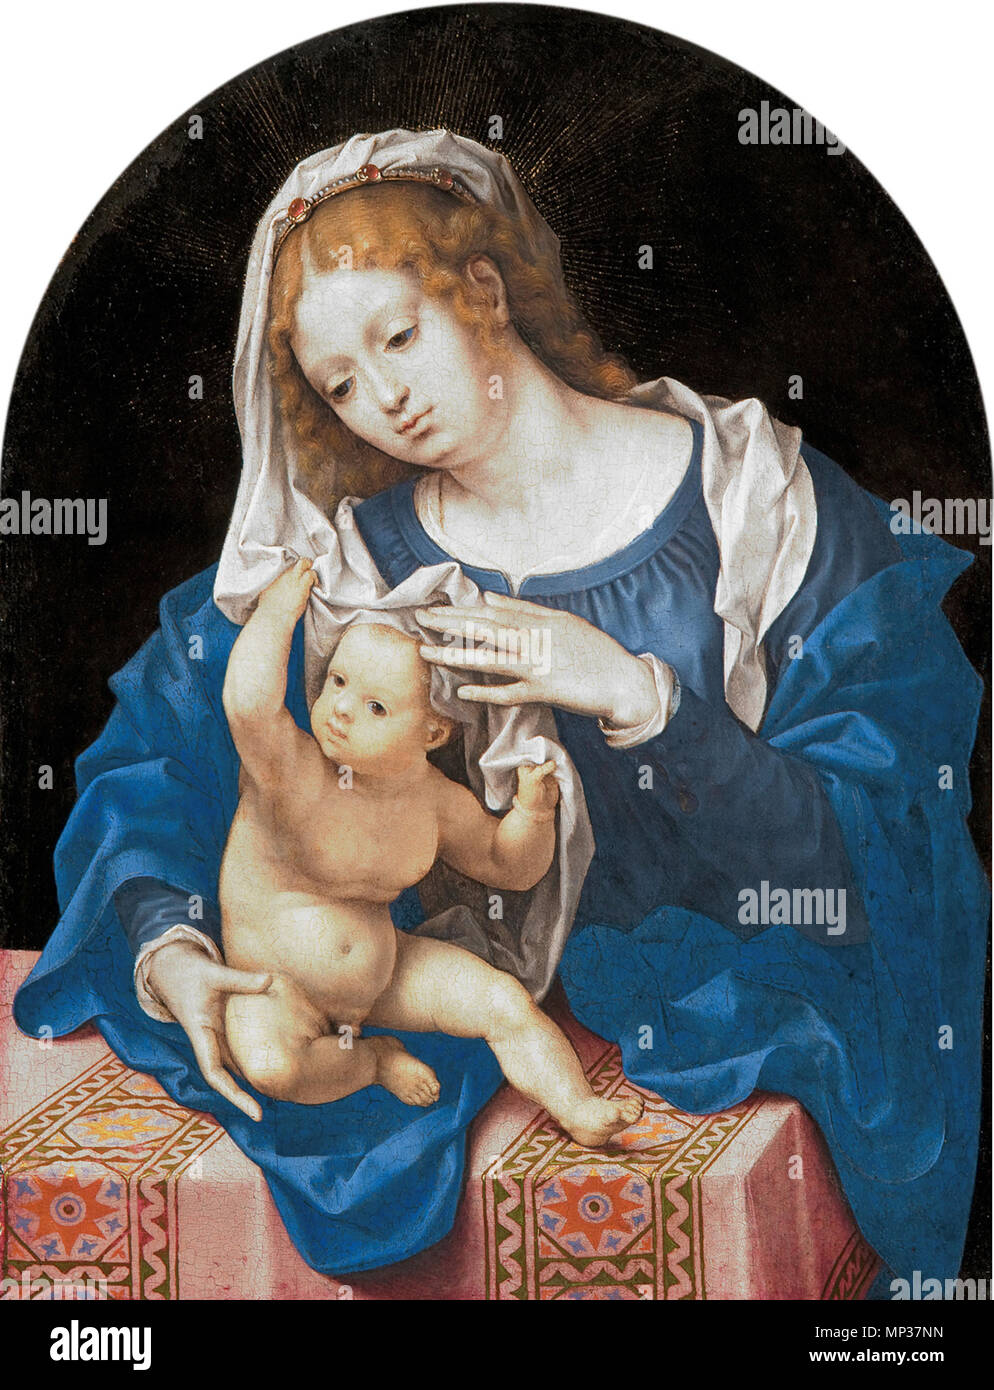 Madonna and Child *oil on panel *25,4 x 19,3 cm *circa 1520   Madonna and Child.. Madonna and Child. The German art historian Max Jakob Friedländer discovered more than 20 period copies of a now-lost original by Gossaert from 1520 (See Other versions below). circa 1520.   698 Jan Gossaert - madonna met kind - Mauritshuis Stock Photo